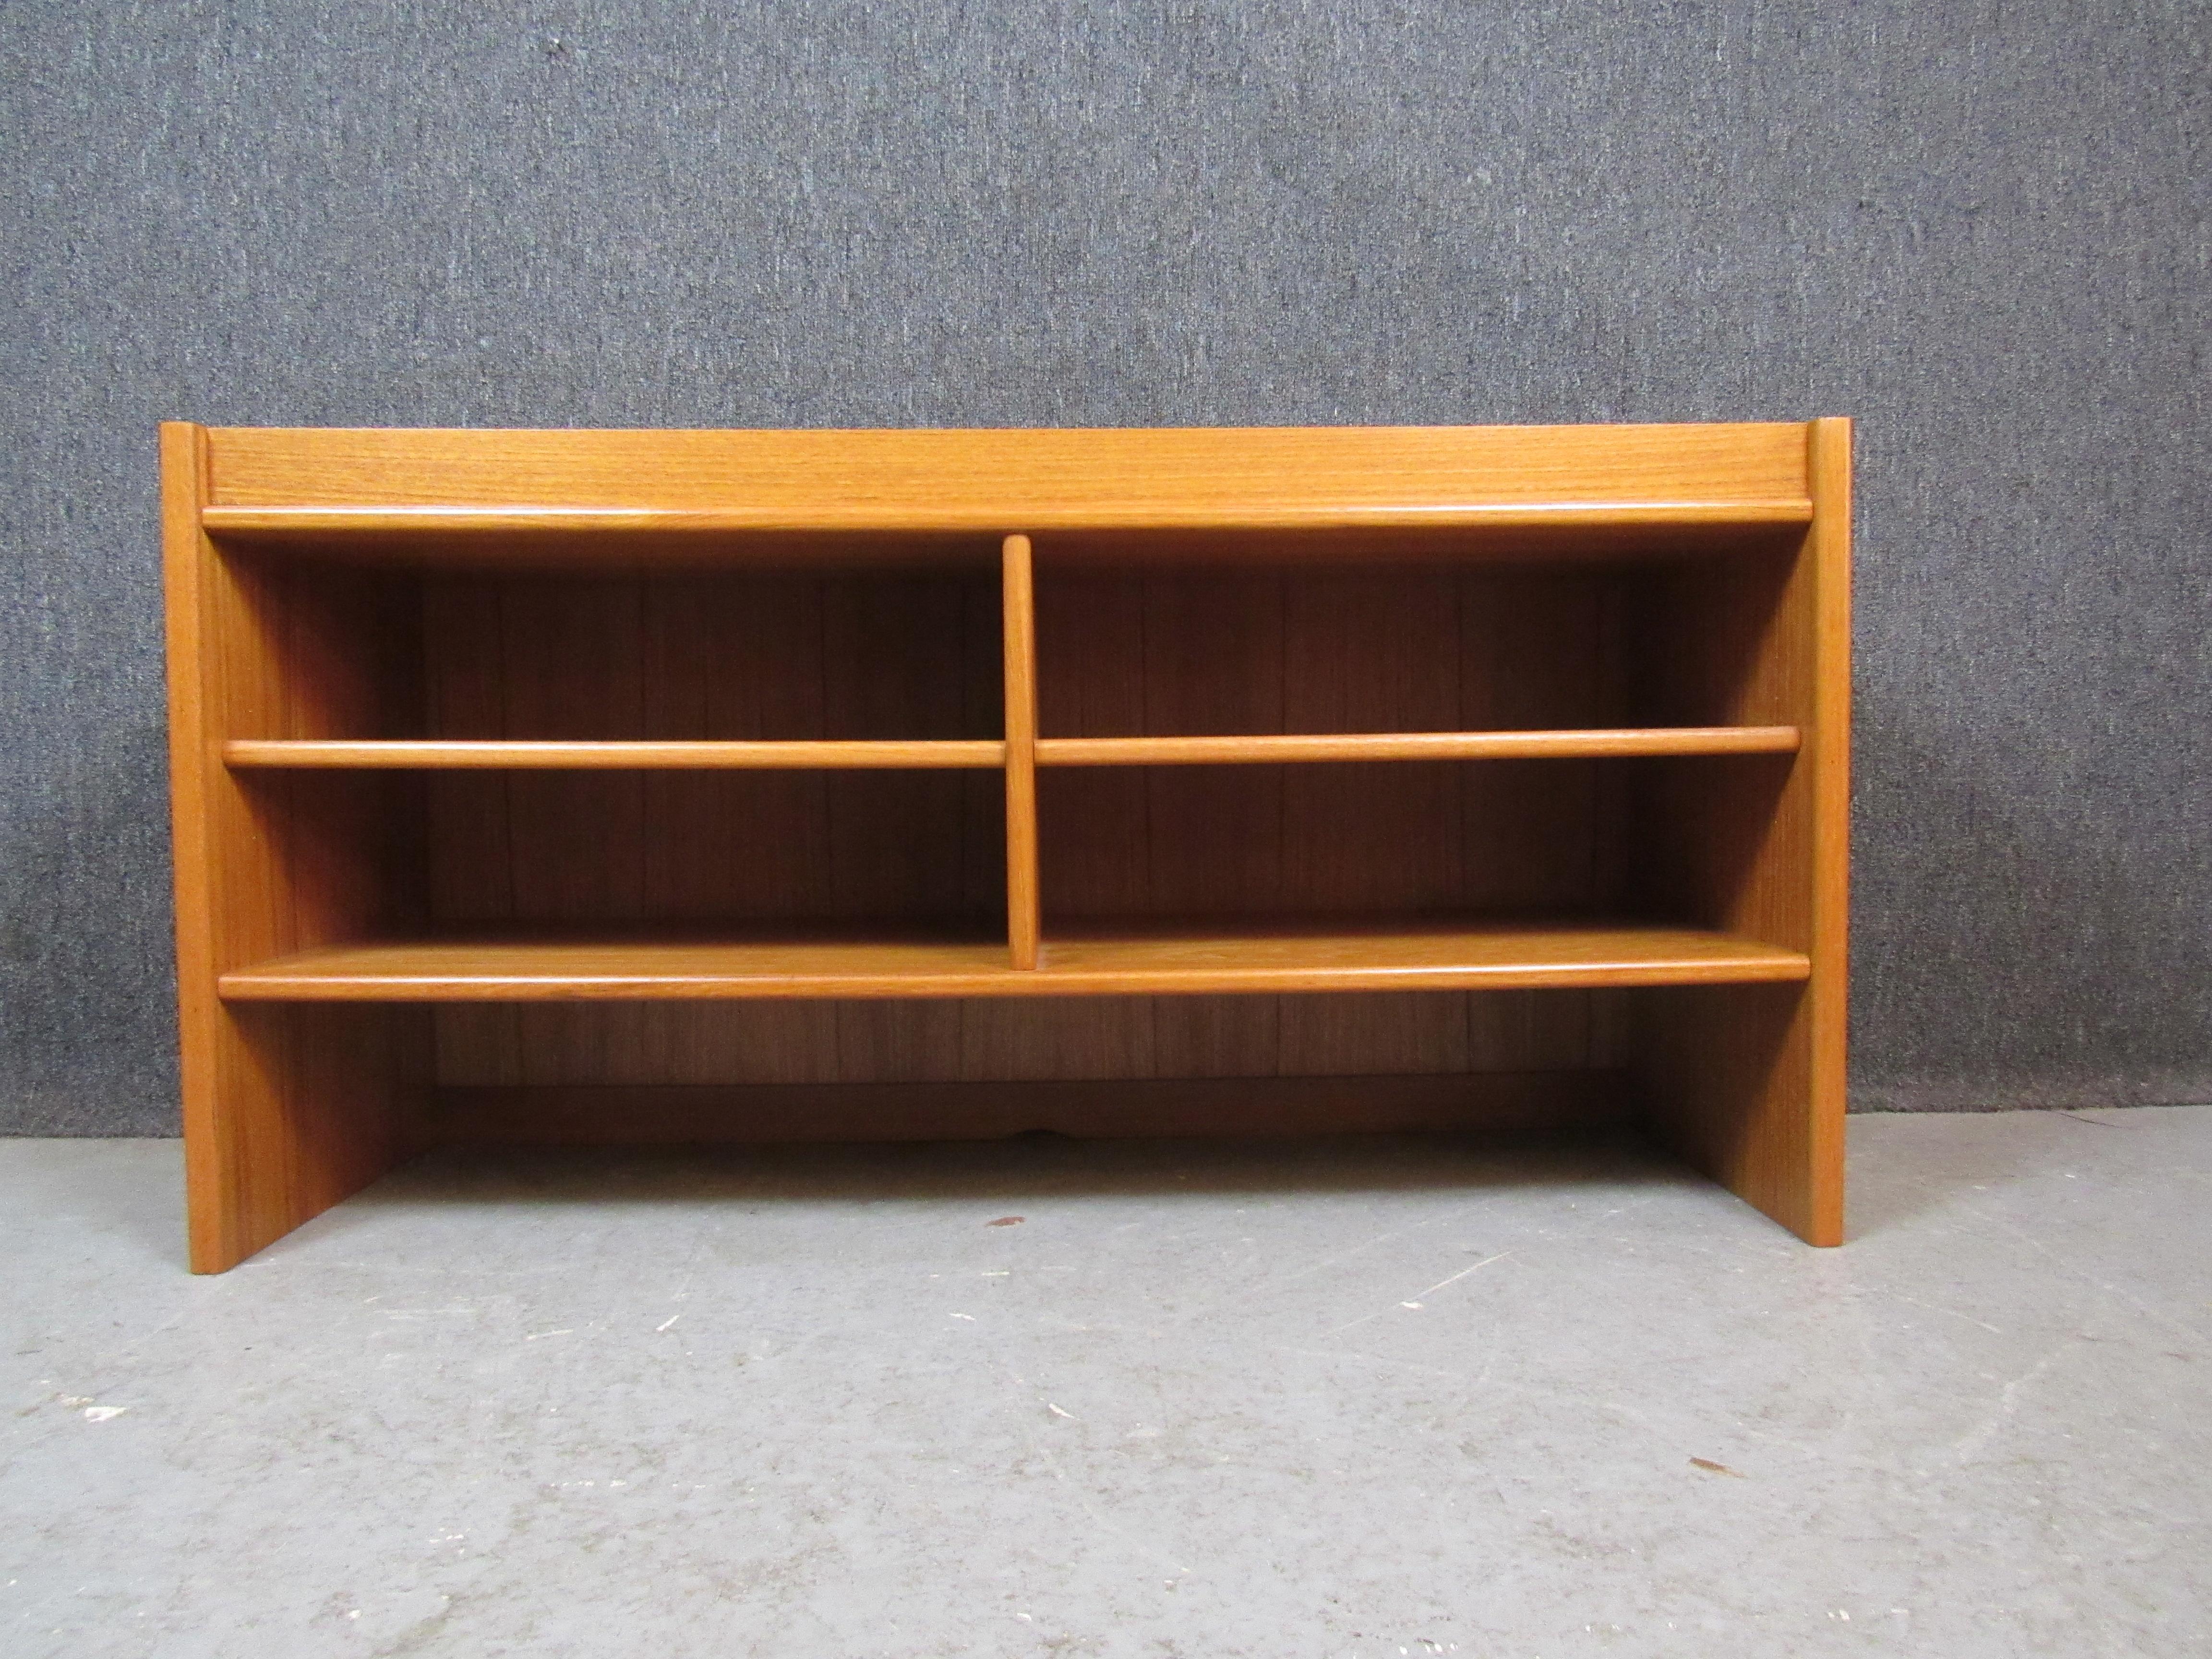 Give your space a dash of mid-century modern charm with this wonderful petite teak bookshelf. With minimalist lines, soft edges, and a vibrant swirling wood grain, this display case is sure to be an object of admiration in its own right. Four